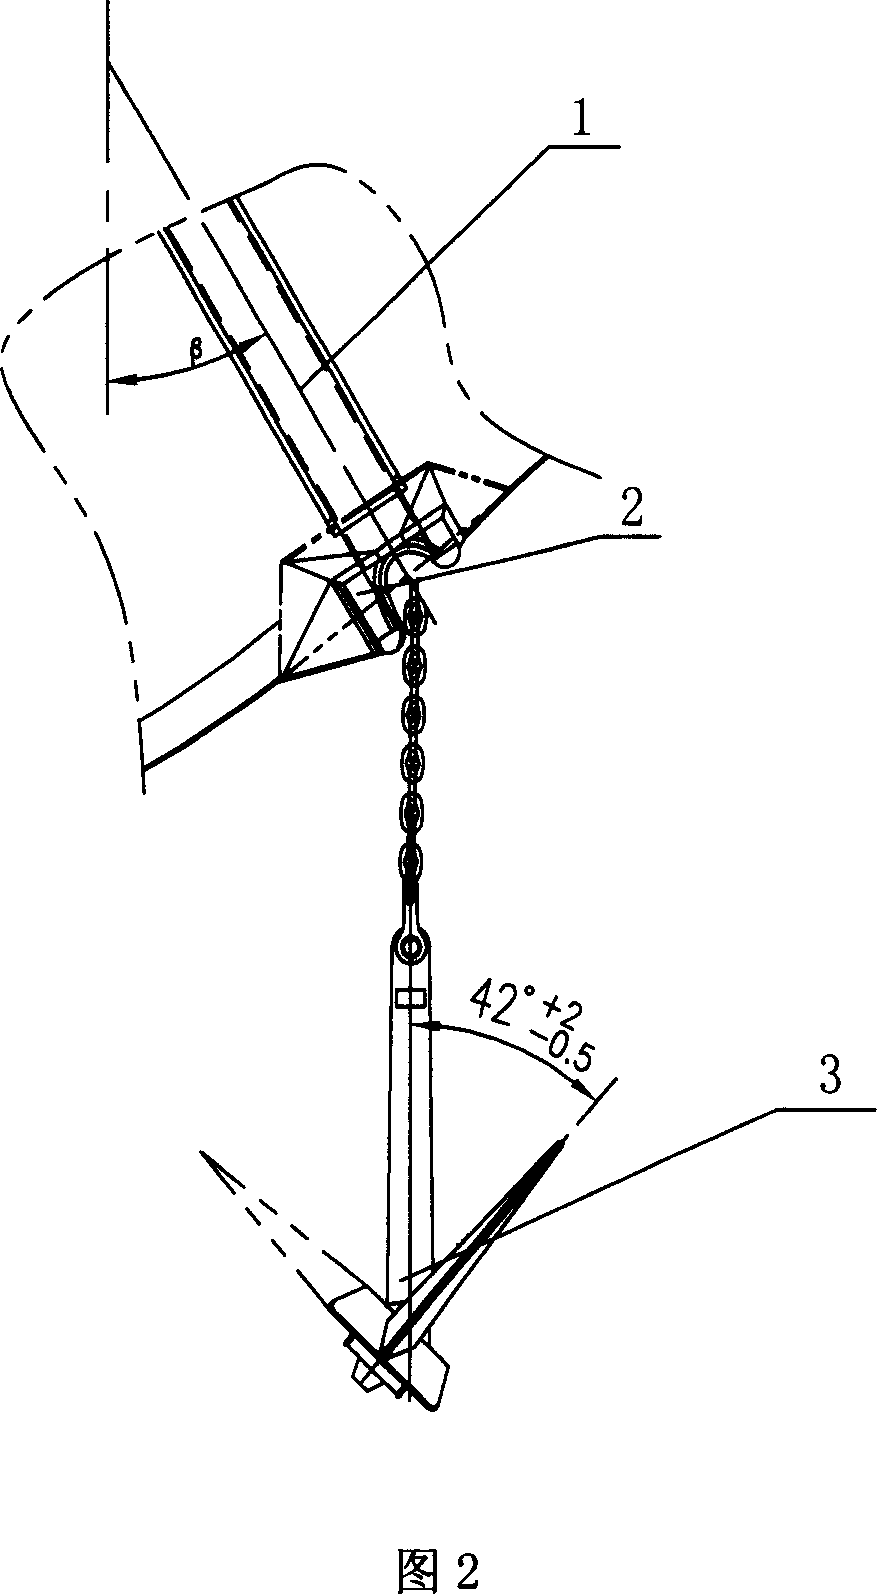 Anchor lip and single bow anchor matching structure for high-speed ship